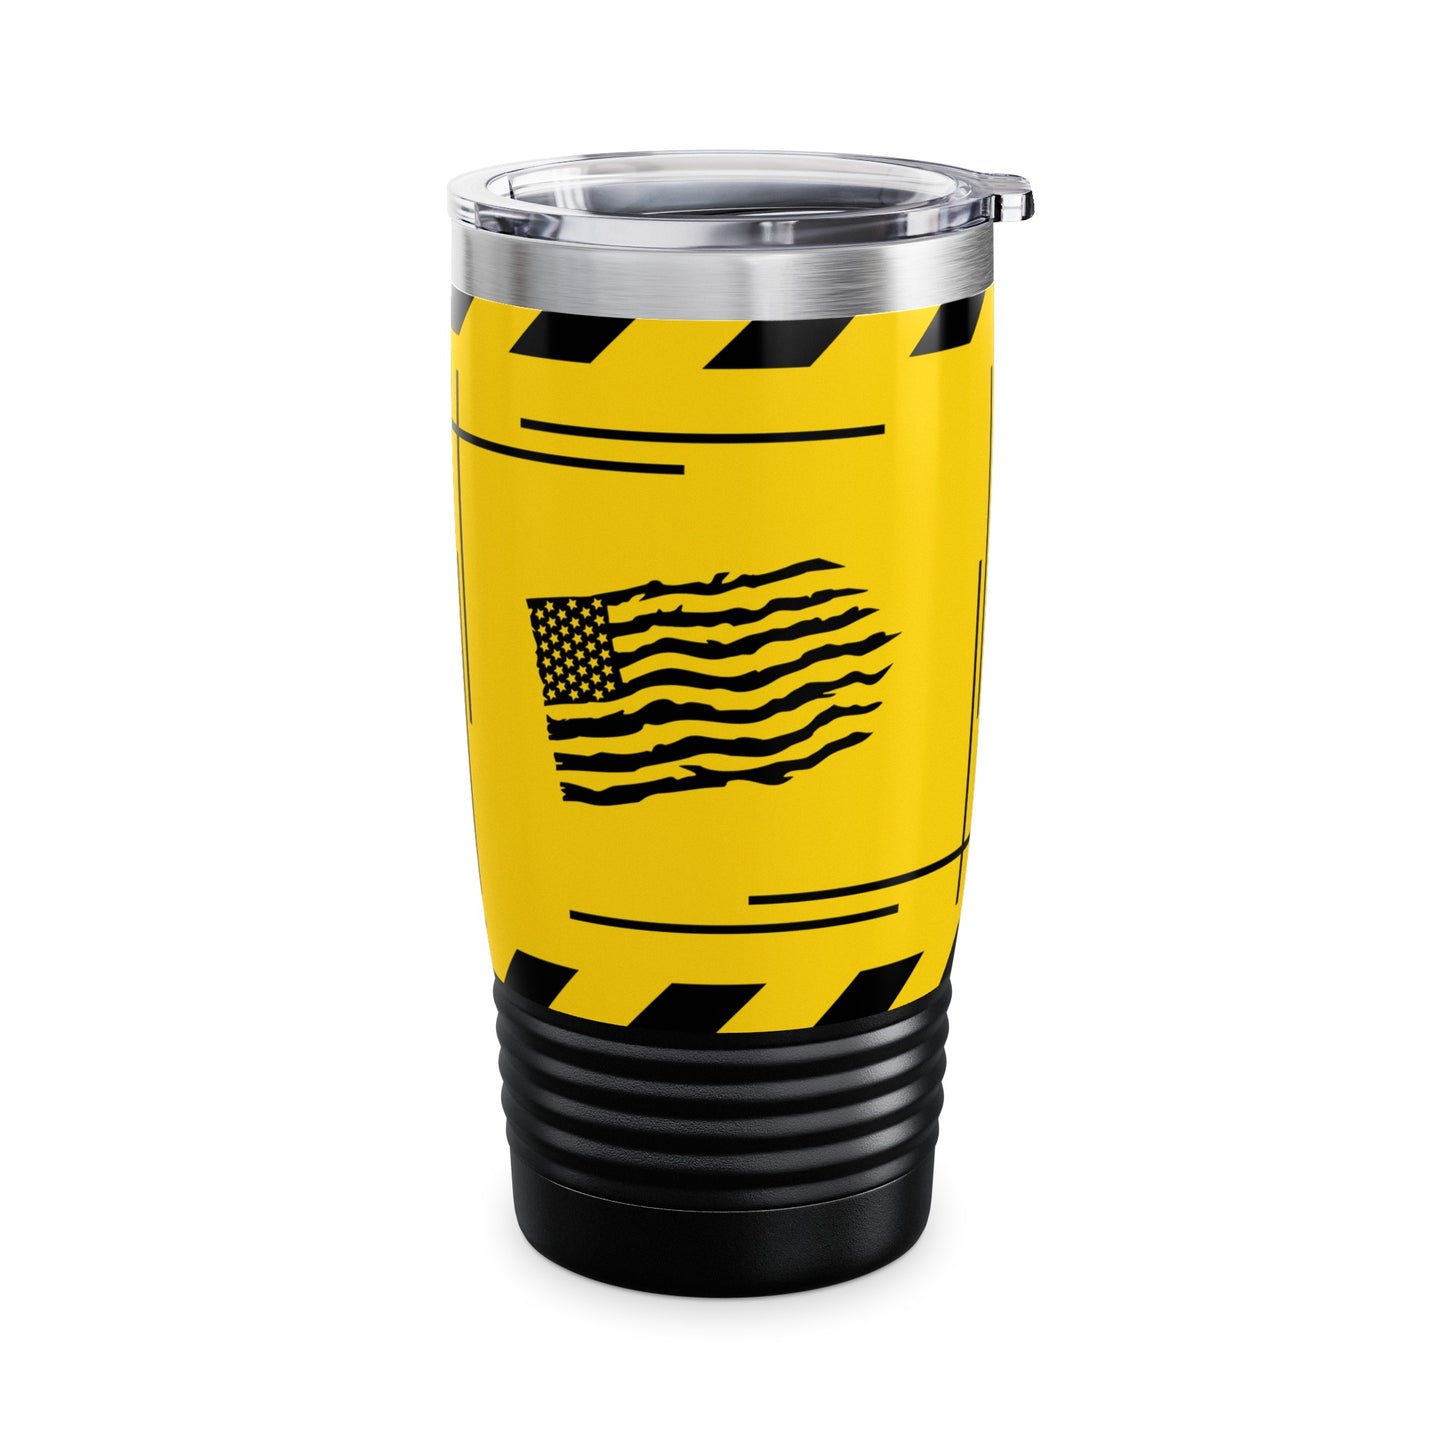 Relax, I'm The FACILITIES ENGINEER, And I Know Things - Ringneck Tumbler, 20oz